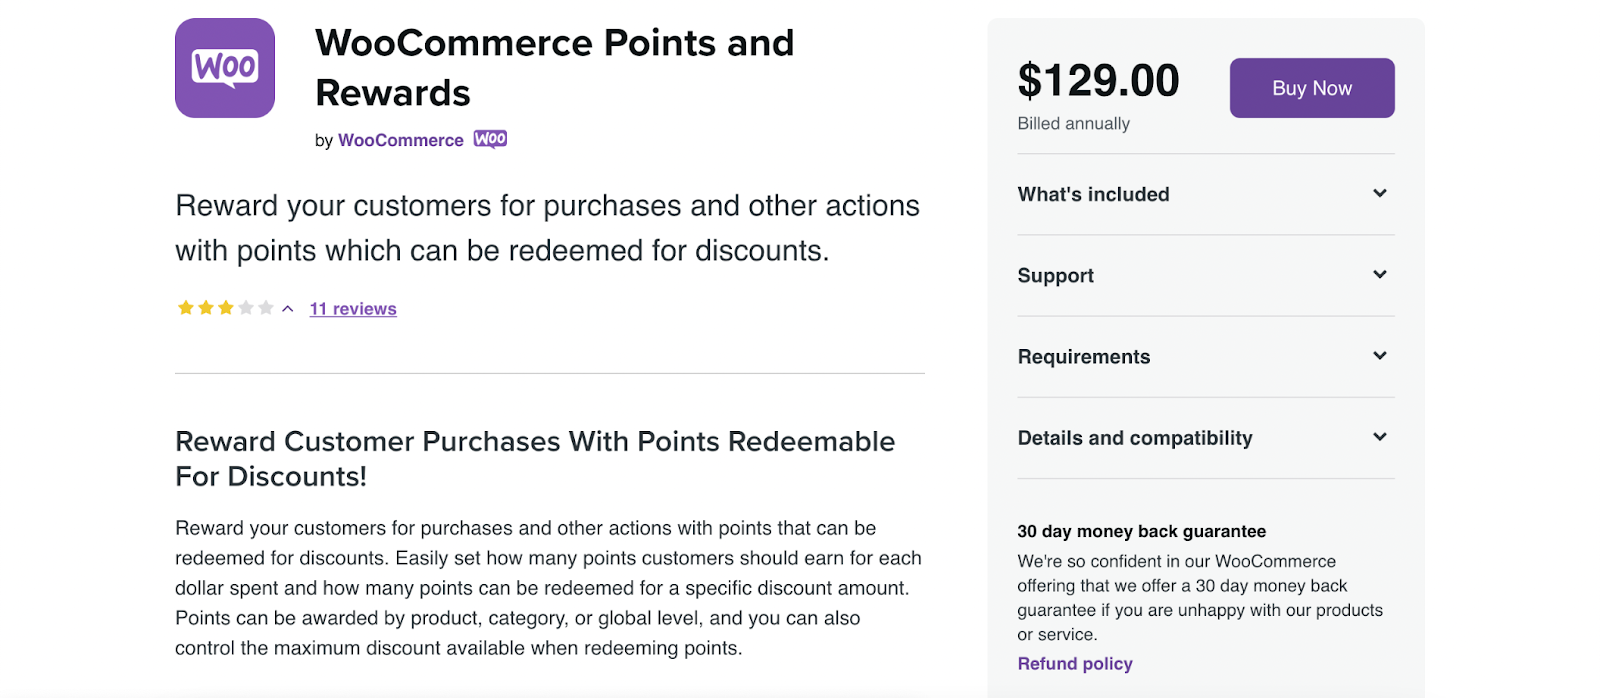 woocommerce points and rewards